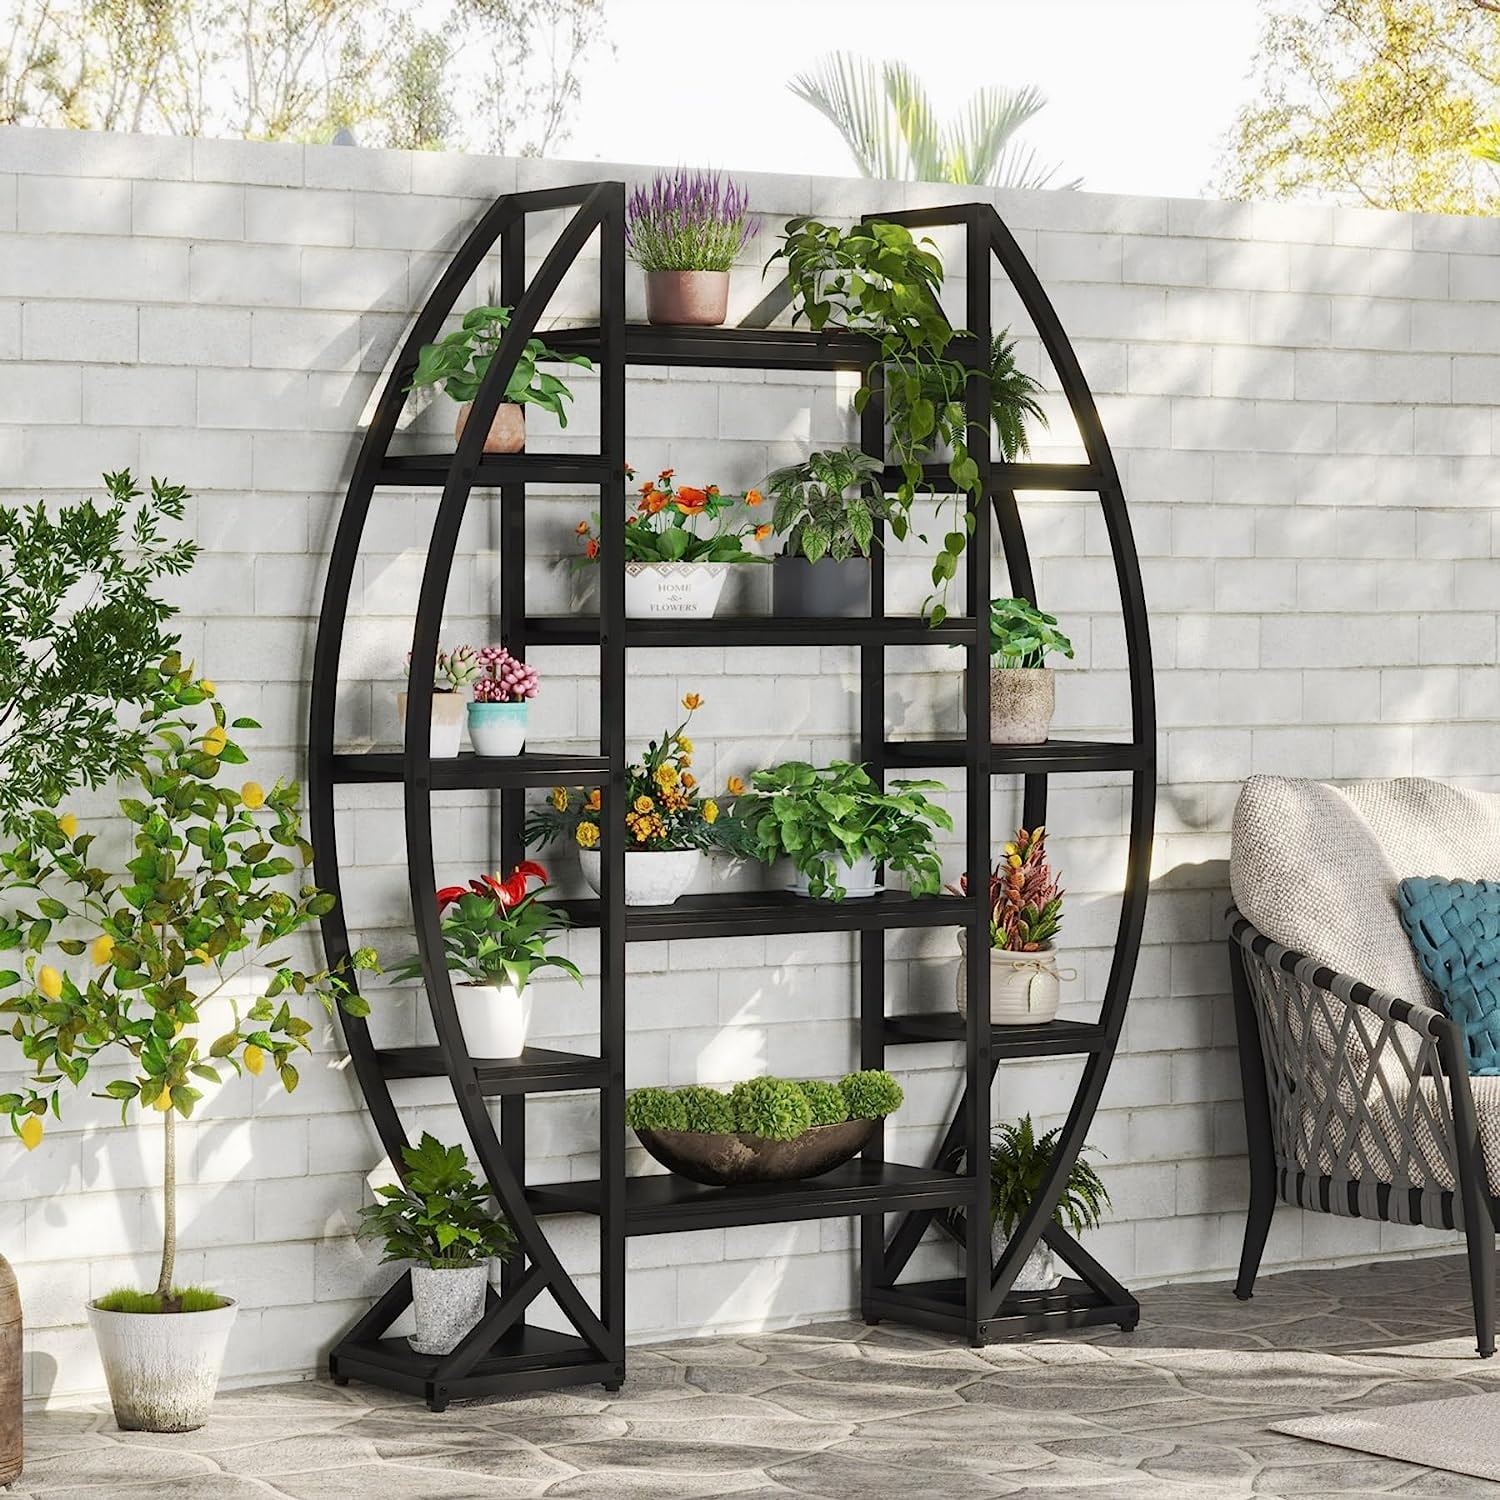 https://ak1.ostkcdn.com/images/products/is/images/direct/90a3541375a3438bc7eeabf2b998747428a1f063/Creative-Half-Moon-Shaped-Plant-Stand-Indoor.jpg